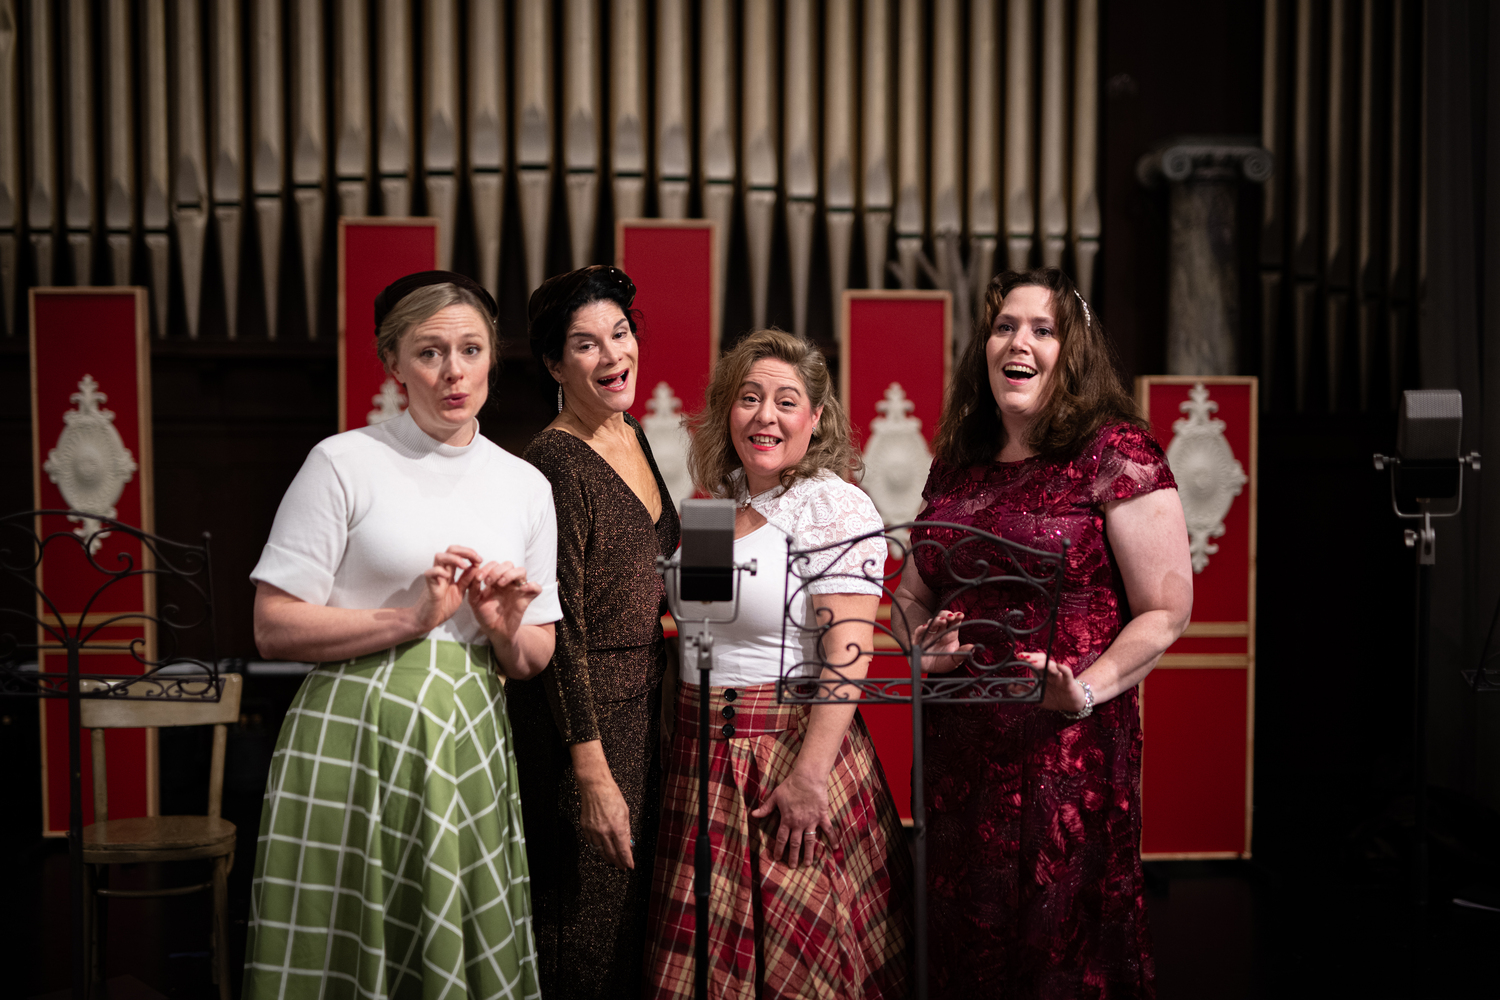 Mary Sabo Scopinich, Salli-Jo Borden, Michaal Lyn Schepps and Sue Conklin in the Center Stage production of “The Big Christmas Show: A Musical Radio Play” at Southampton Arts Center. DANE DUPUIS